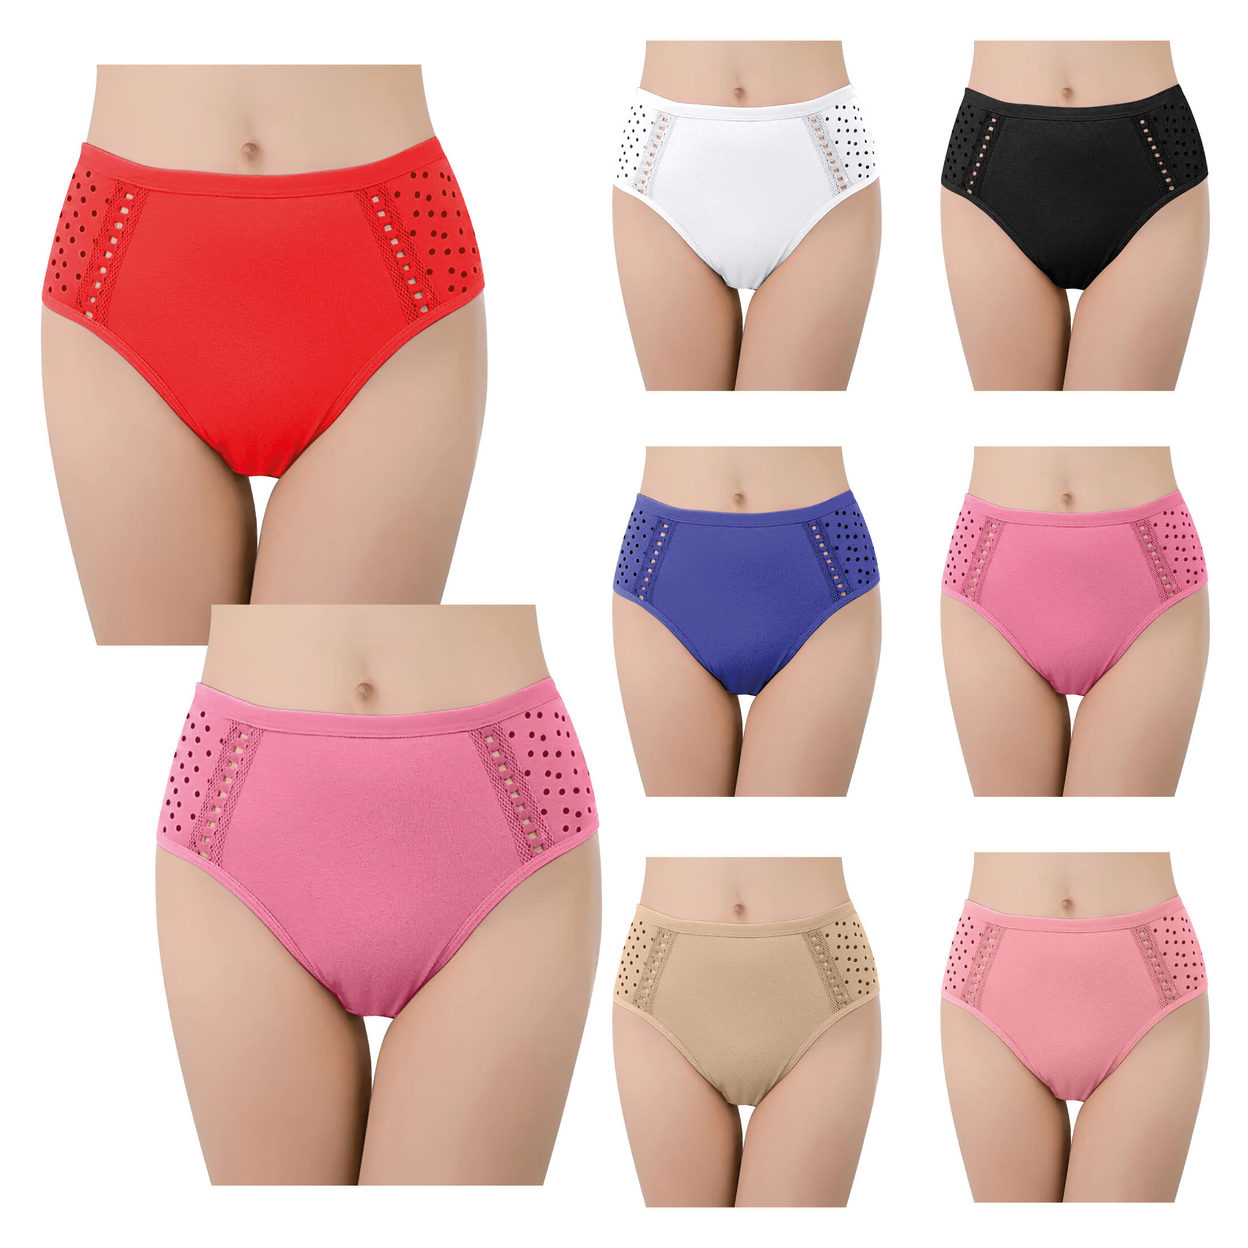 12-Pack: Women's Ultra Soft Moisture Wicking Panties Cotton Perfect Fit Underwear (Plus Sizes Available) - Medium